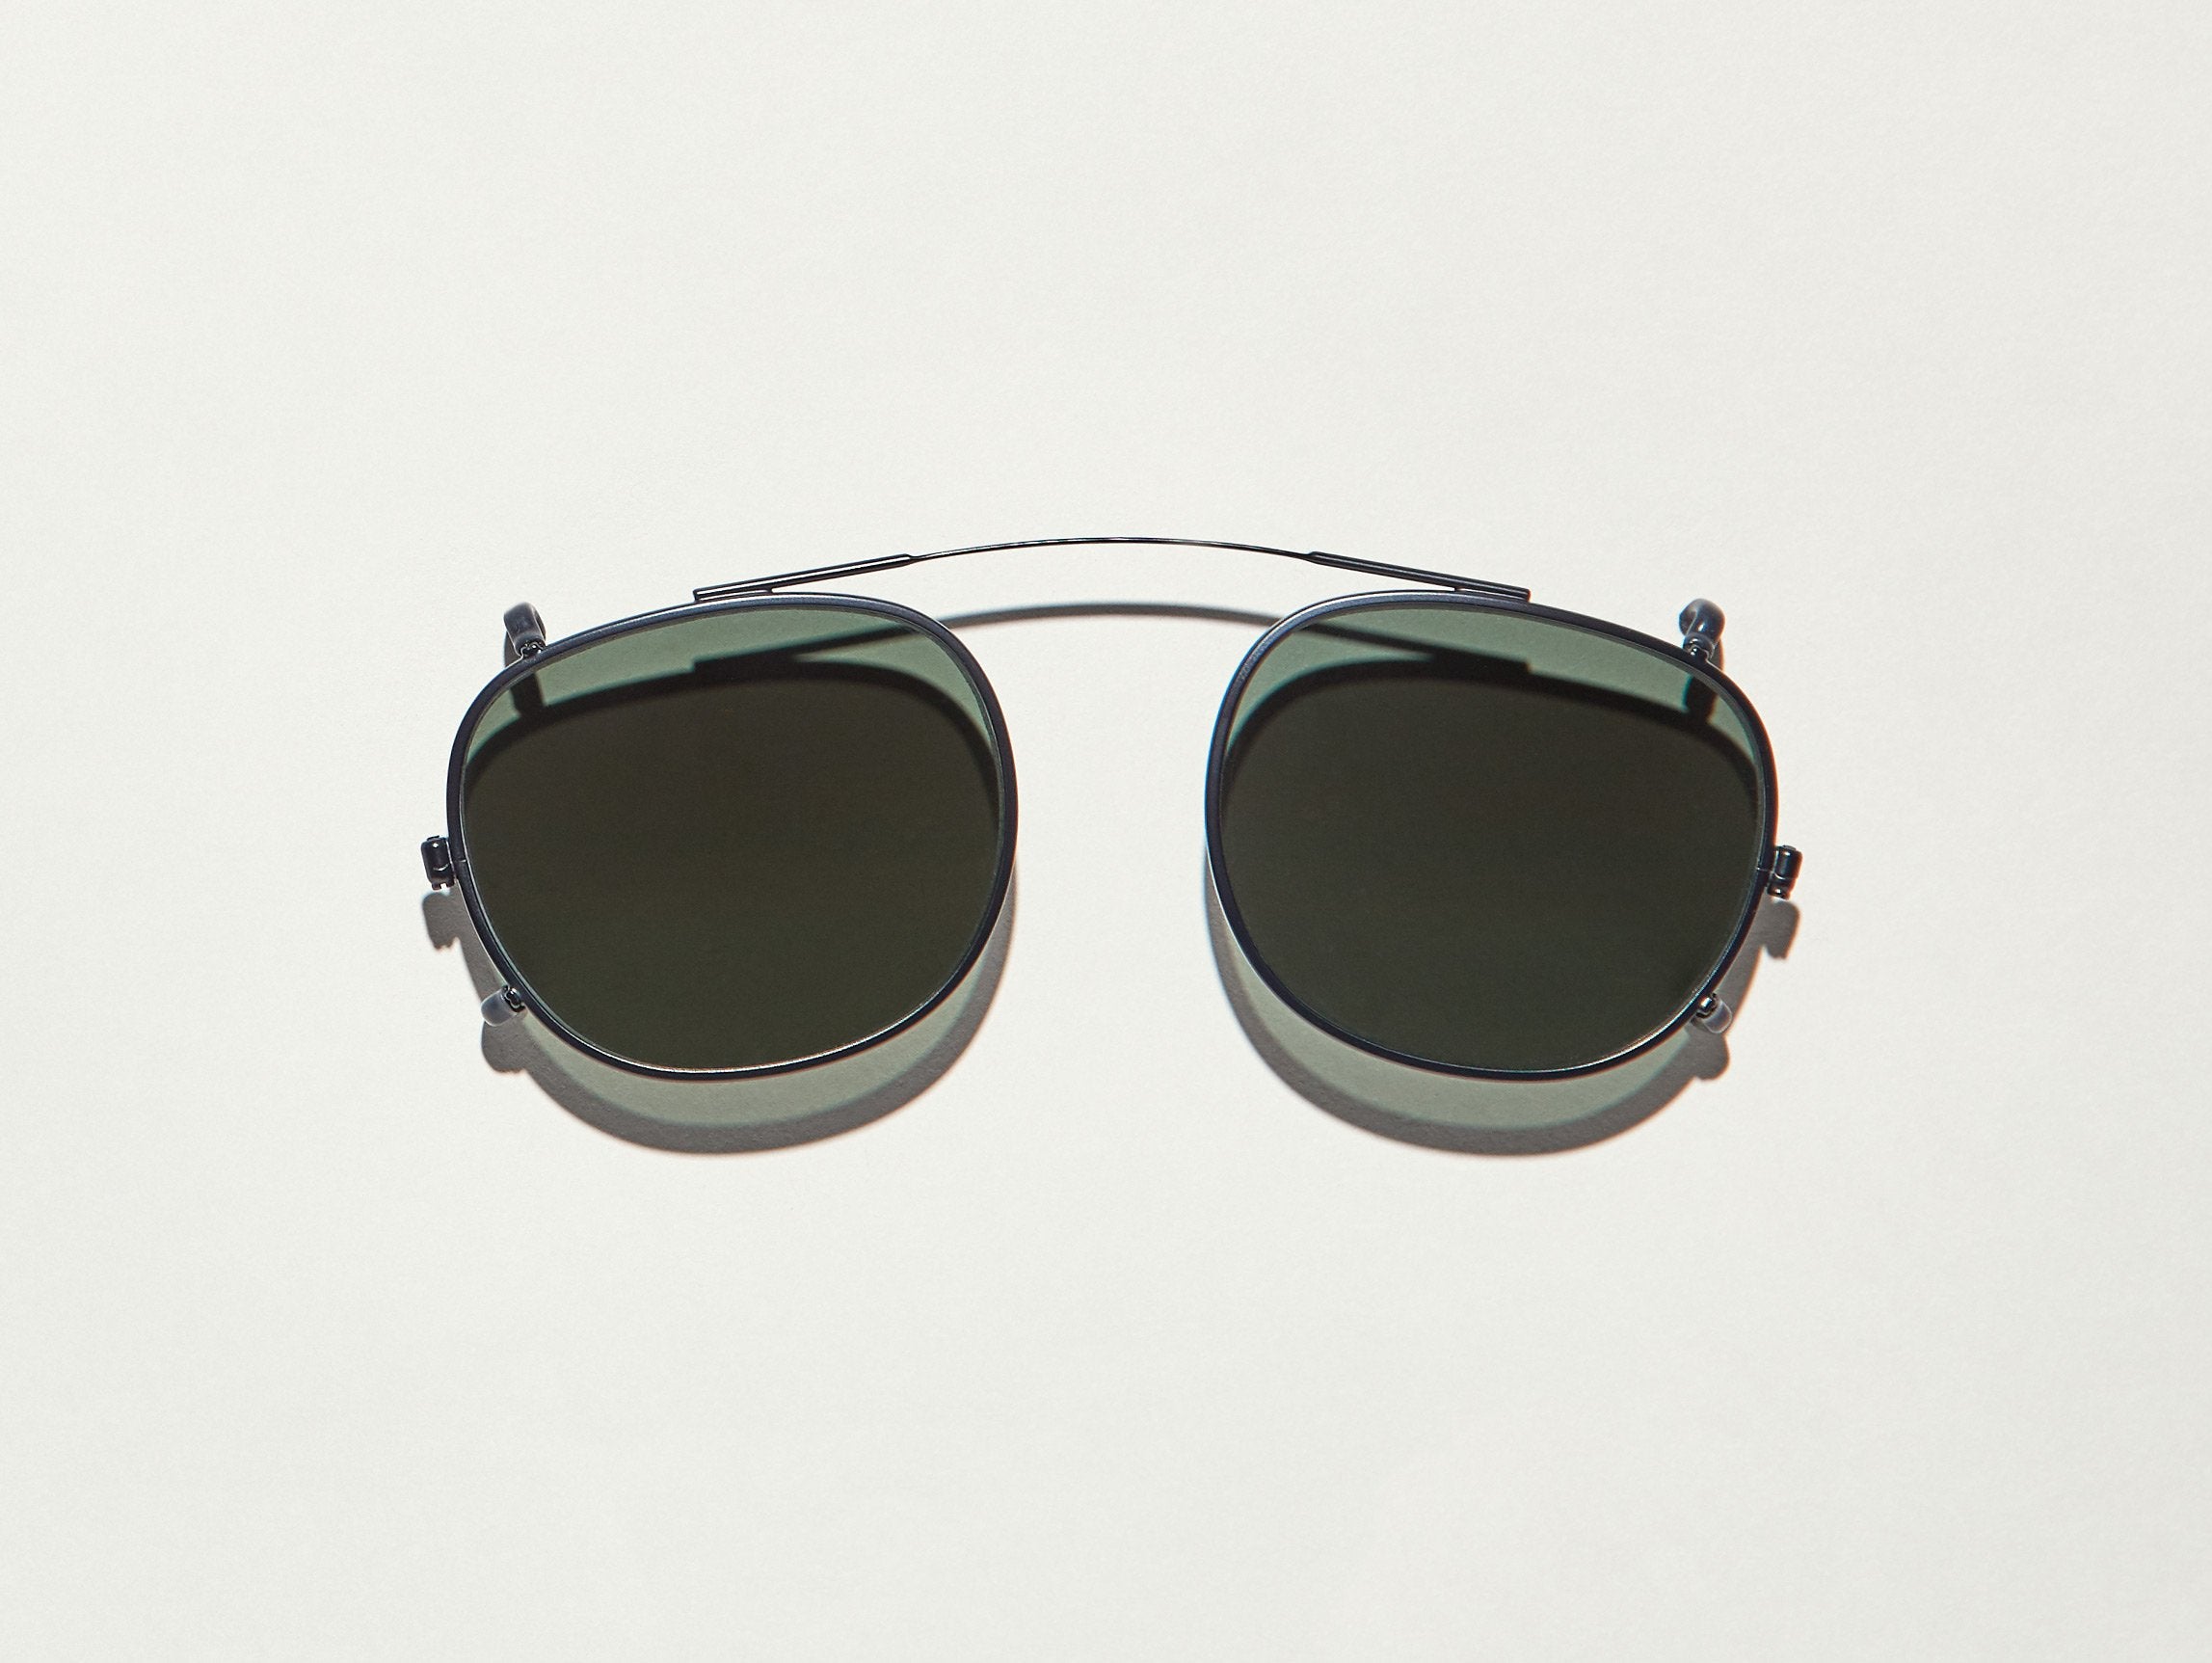 The CLIPTOSH POLARIZED in Matte Black with G-15 Lenses